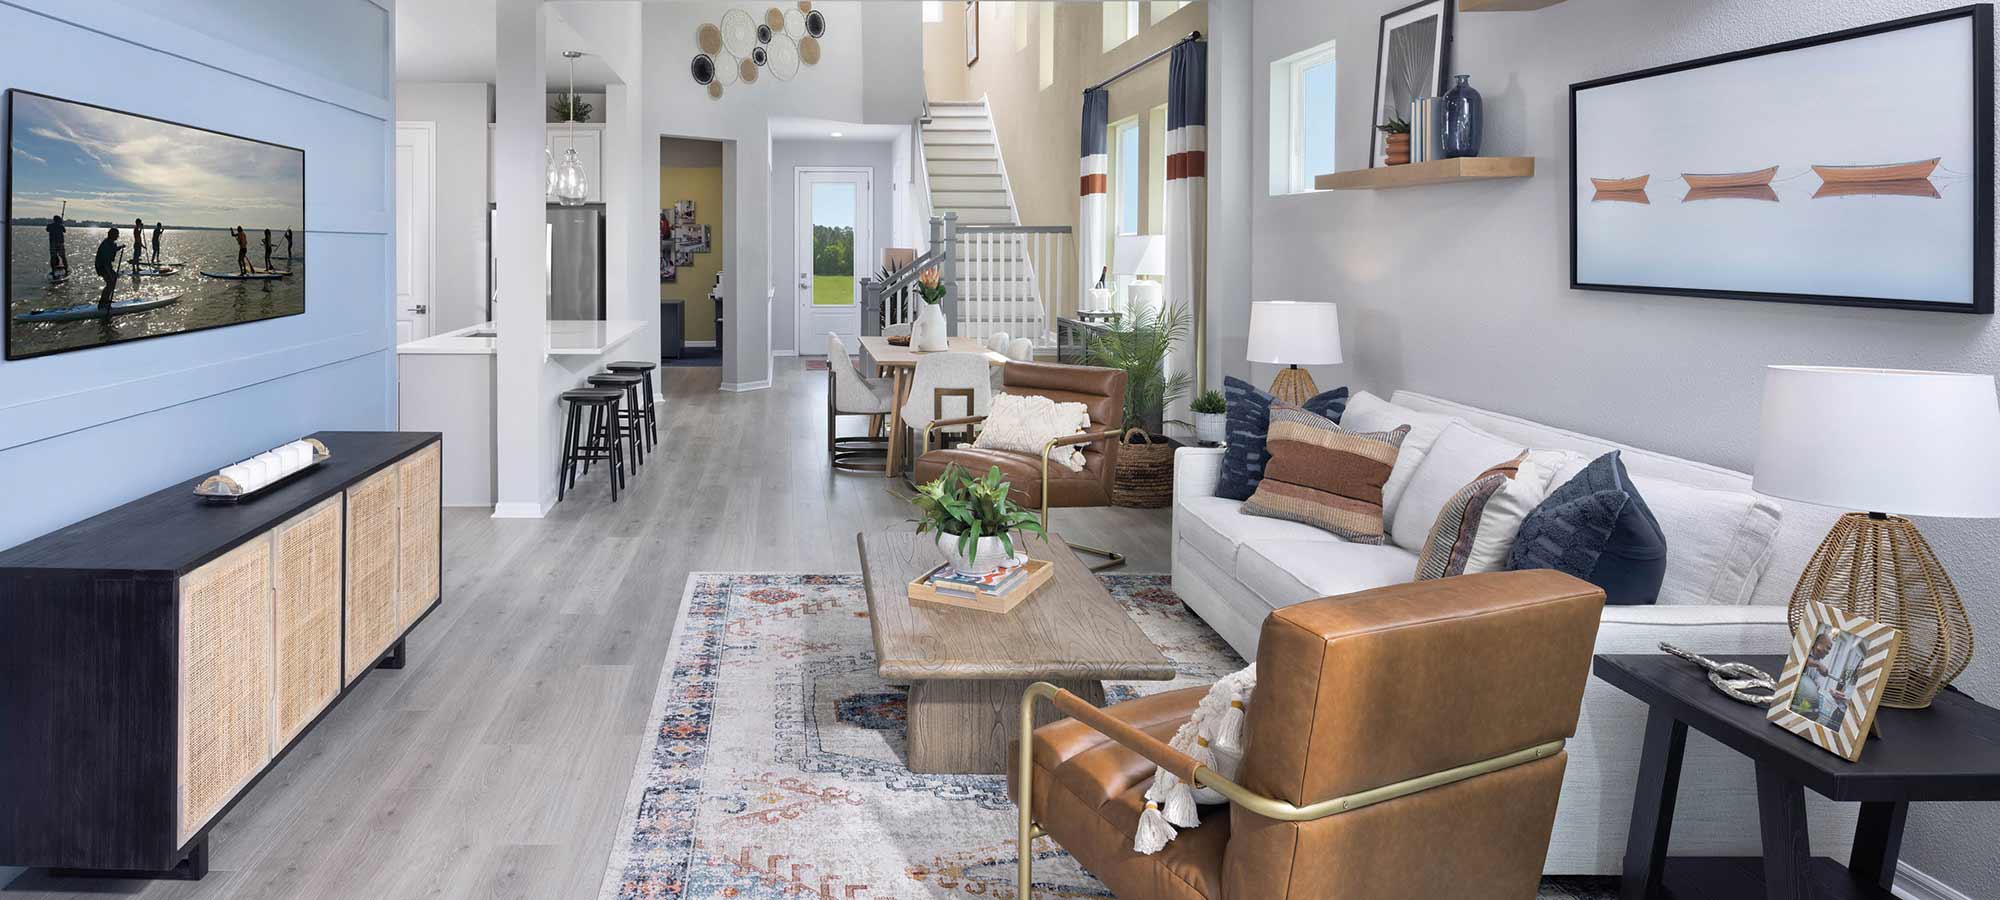 Special Incentives on Select Quick Move-in Homes in Tampa